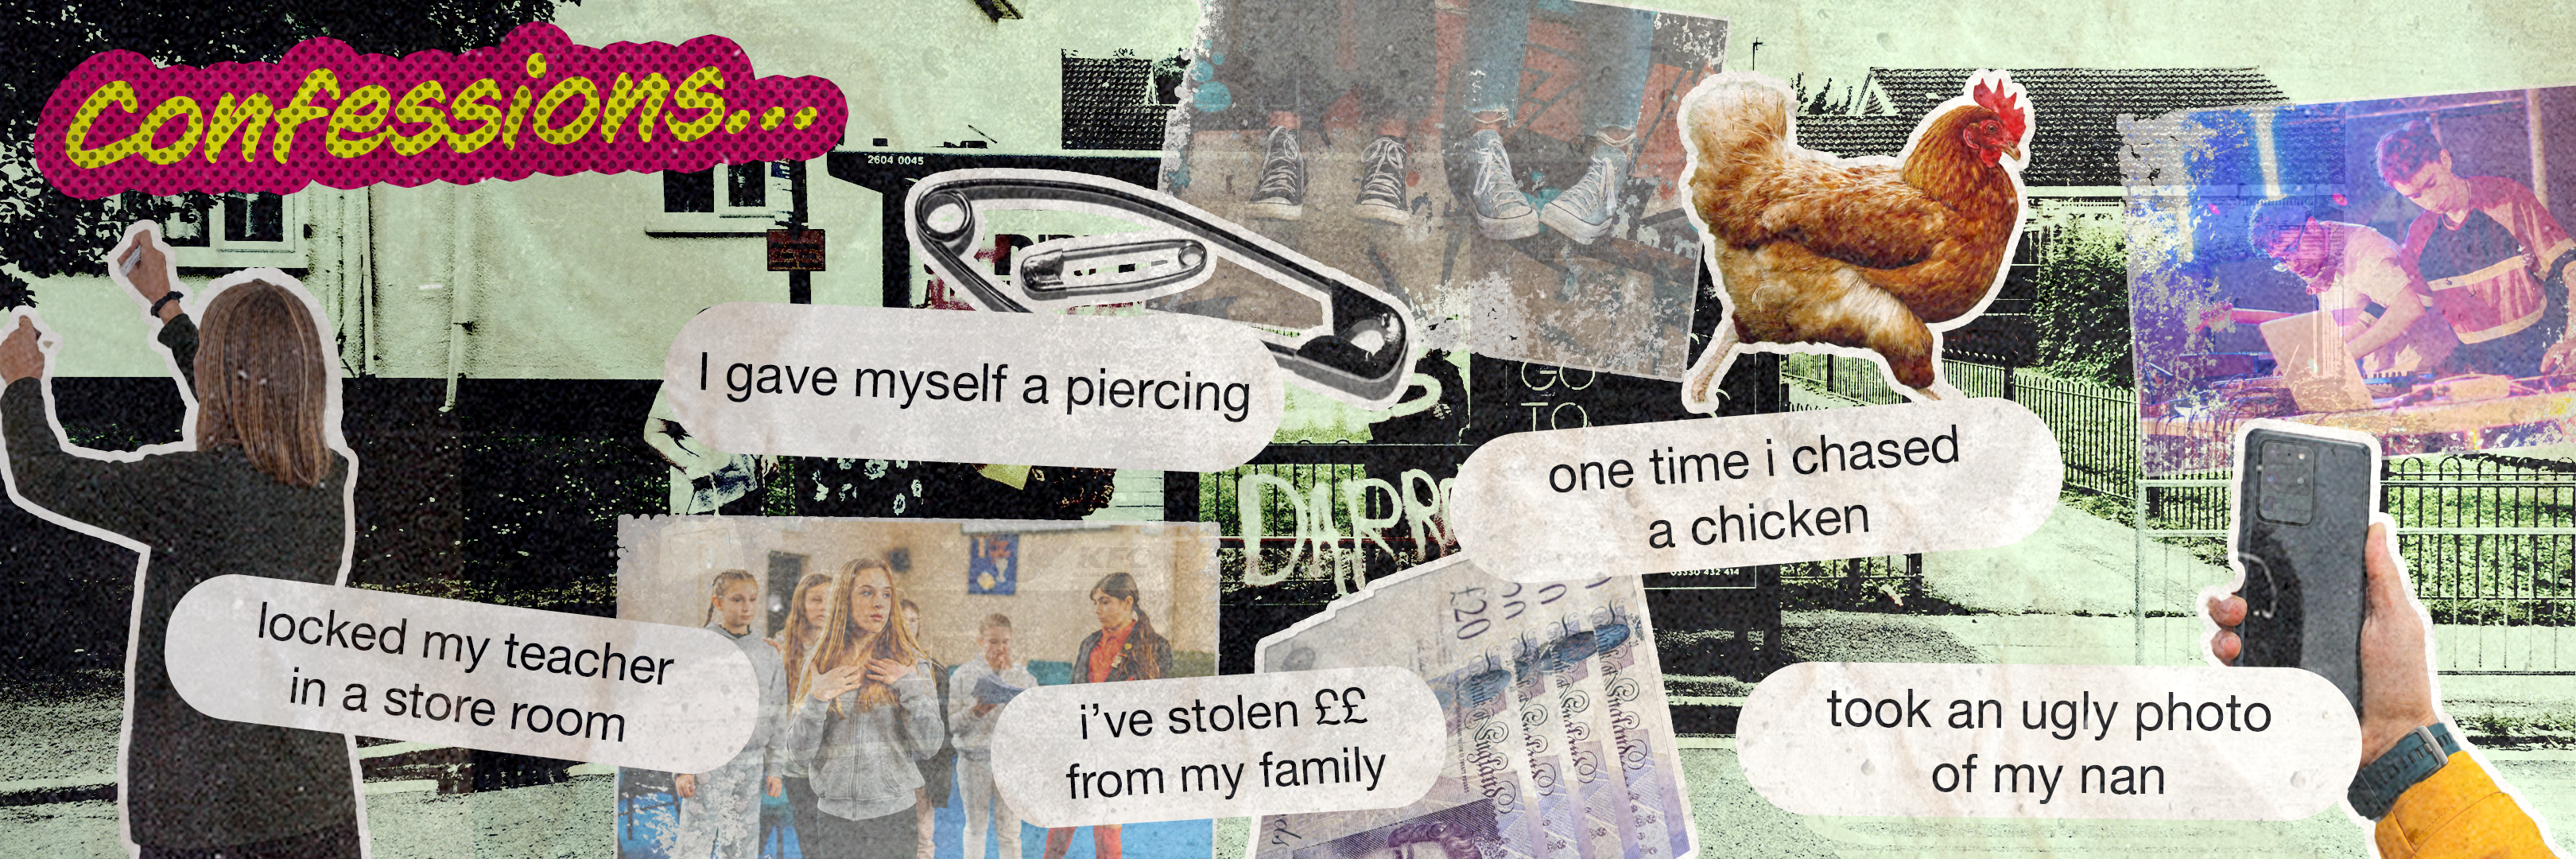 A wide collage image titled 'Confessions', including text-message-style snippets saying things like 'I locked my teacher in a store room' and 'I stole ££ from my family'.